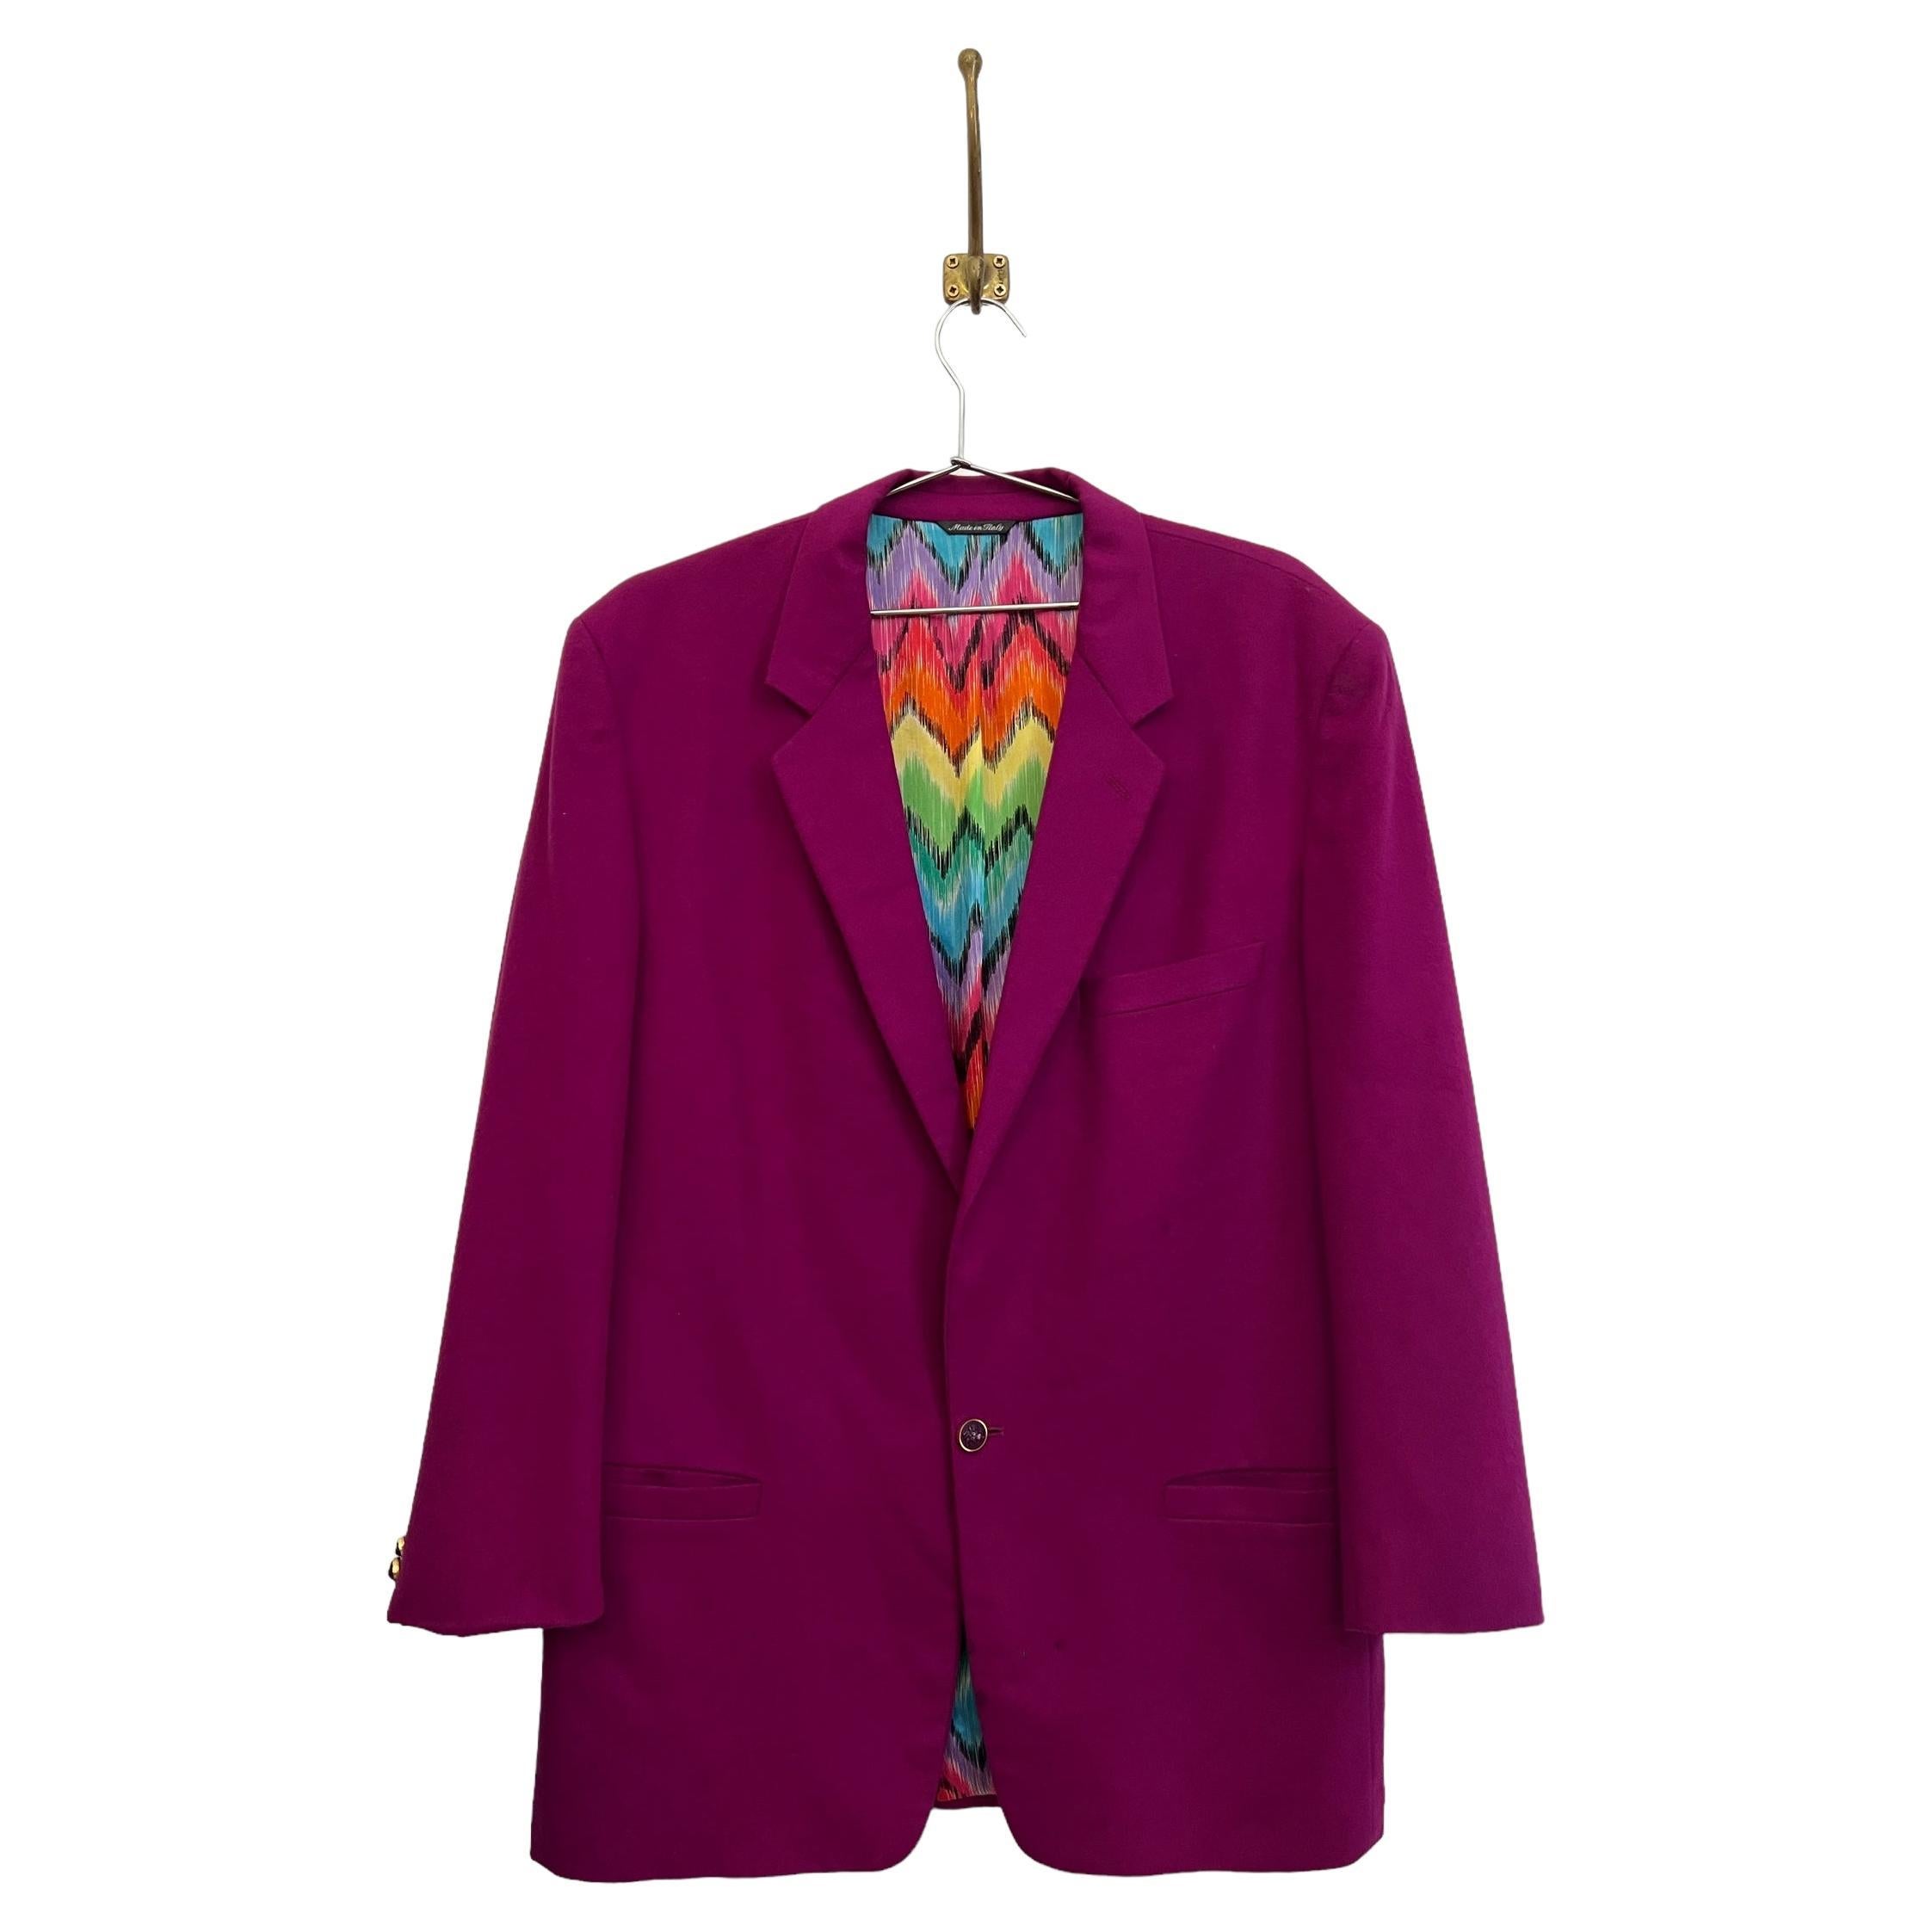 Versus by Gianni Versace Magenta Pink Rainbow Lined Cashmere Blazer Suit Jacket For Sale